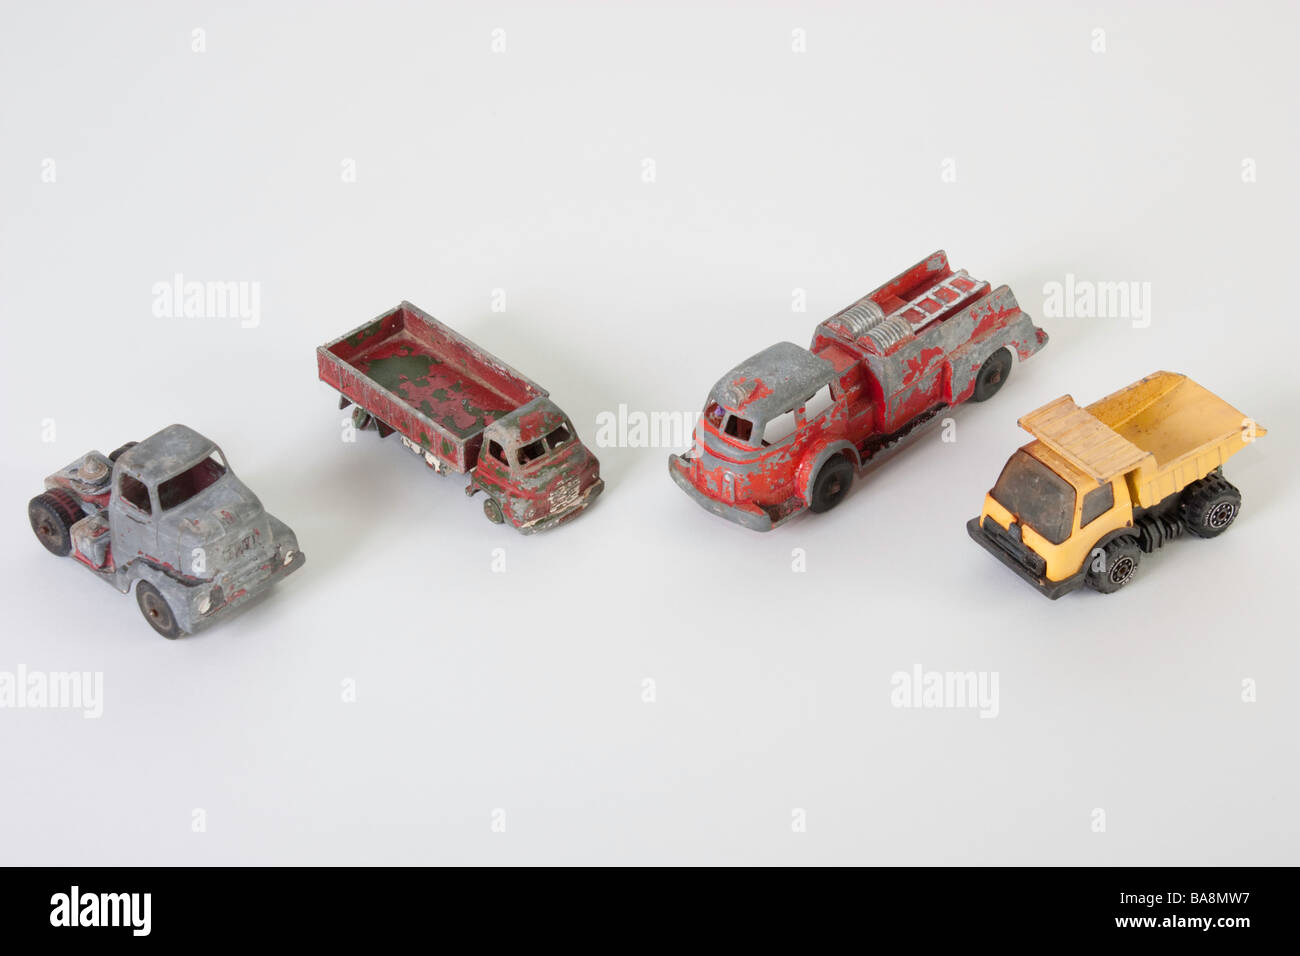 Worn out toys of a bygone era Stock Photo